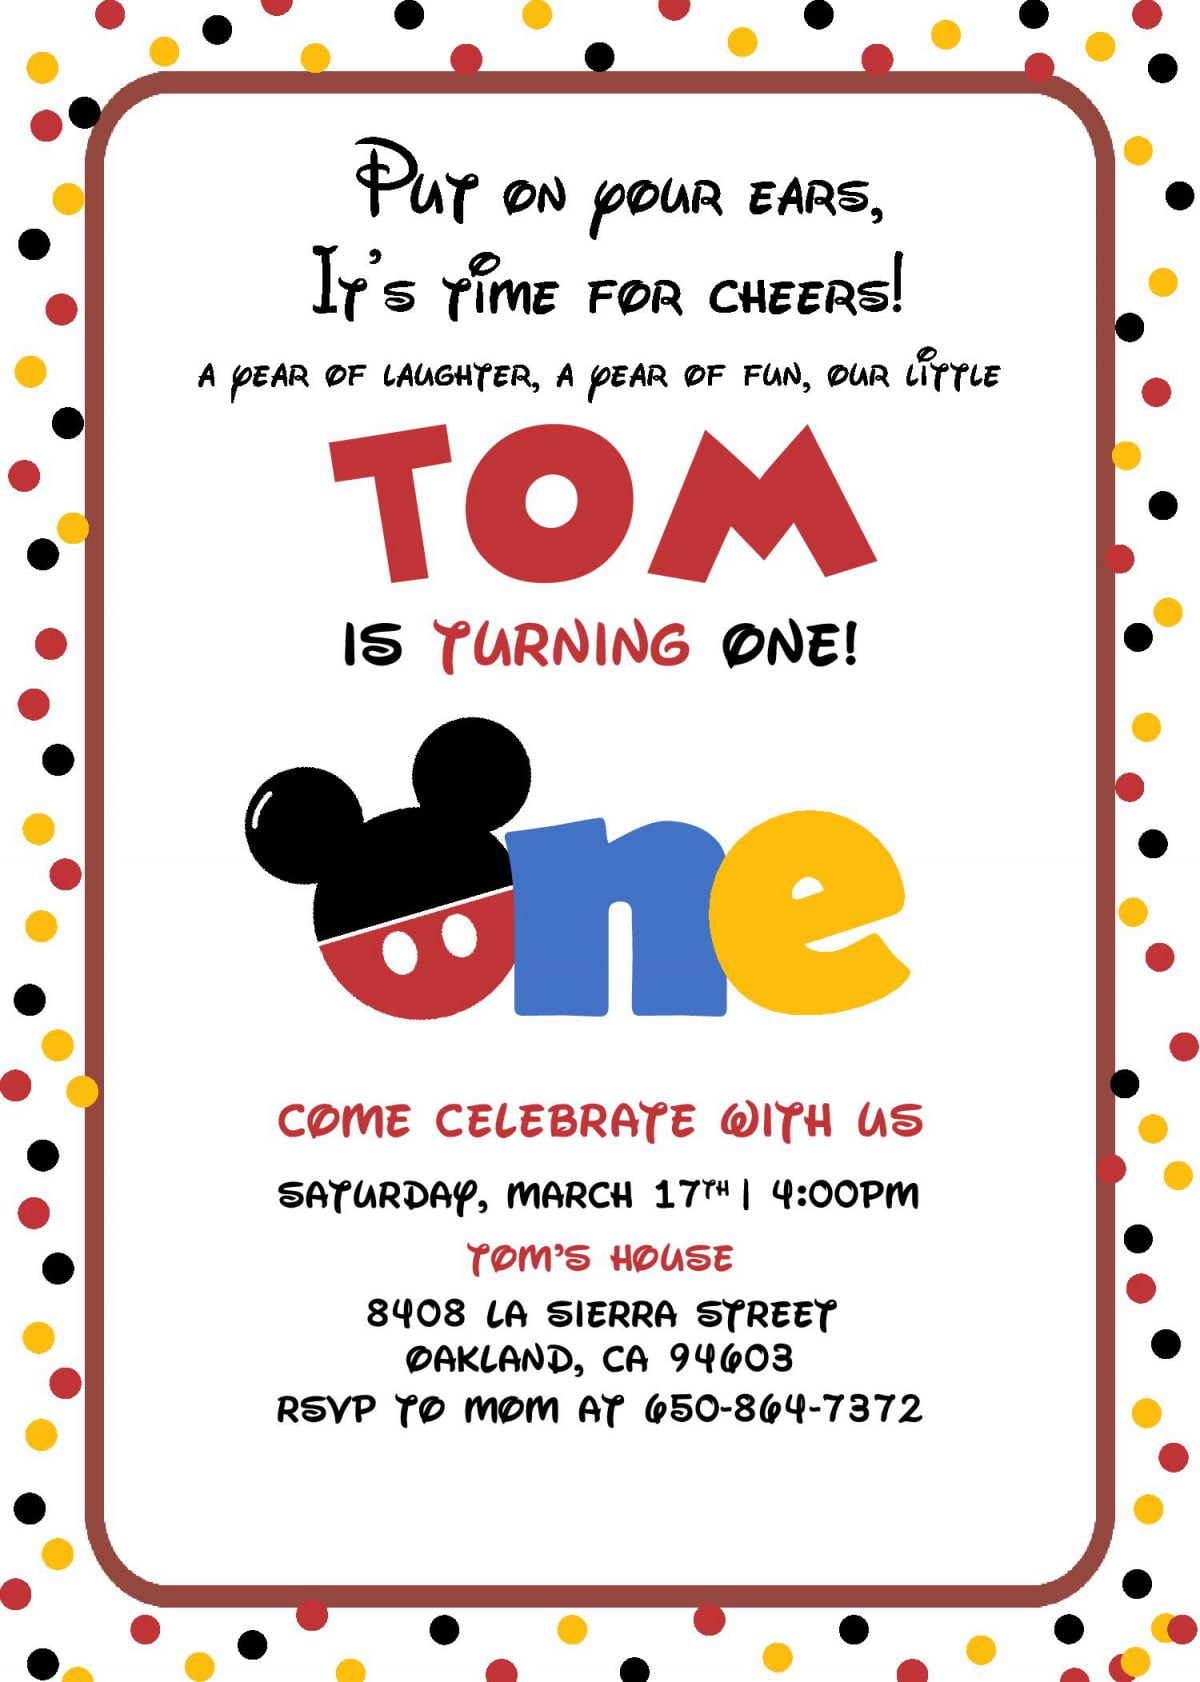 Cute Mickey Mouse Invitation Templates - Editable With MS Word and has white background